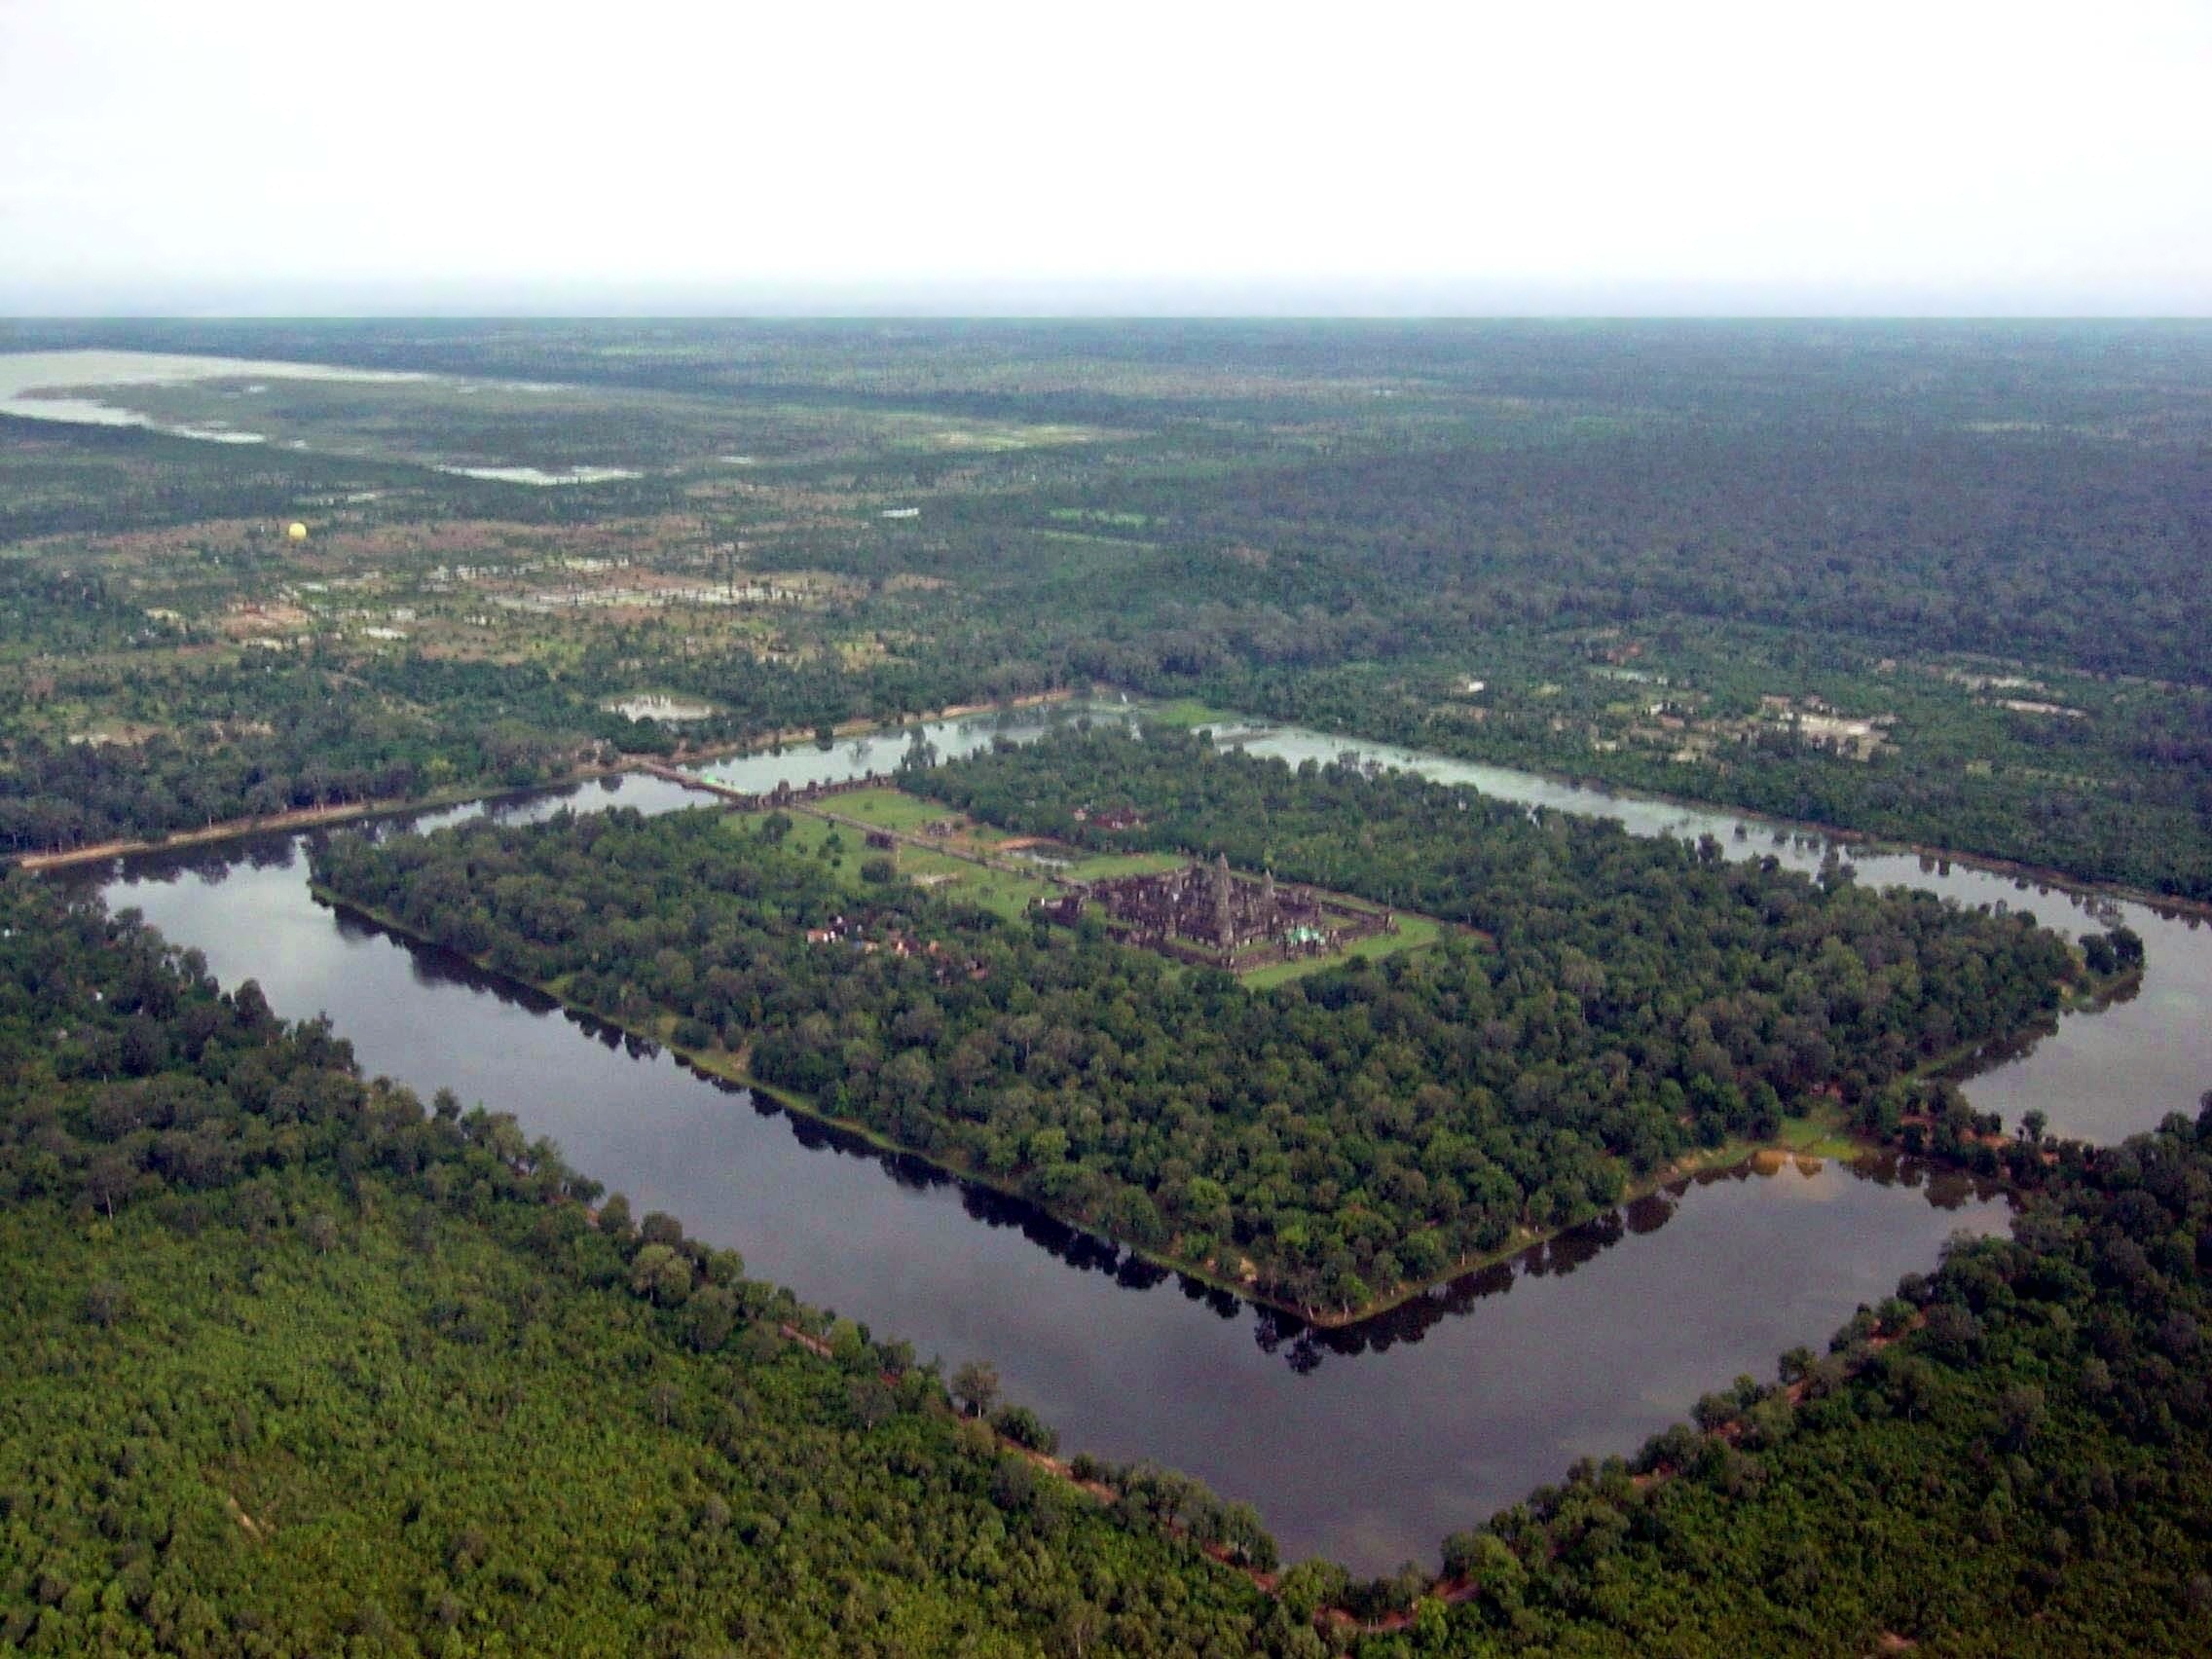 https://upload.wikimedia.org/wikipedia/commons/5/5d/Angkor-Wat-from-the-air.JPG